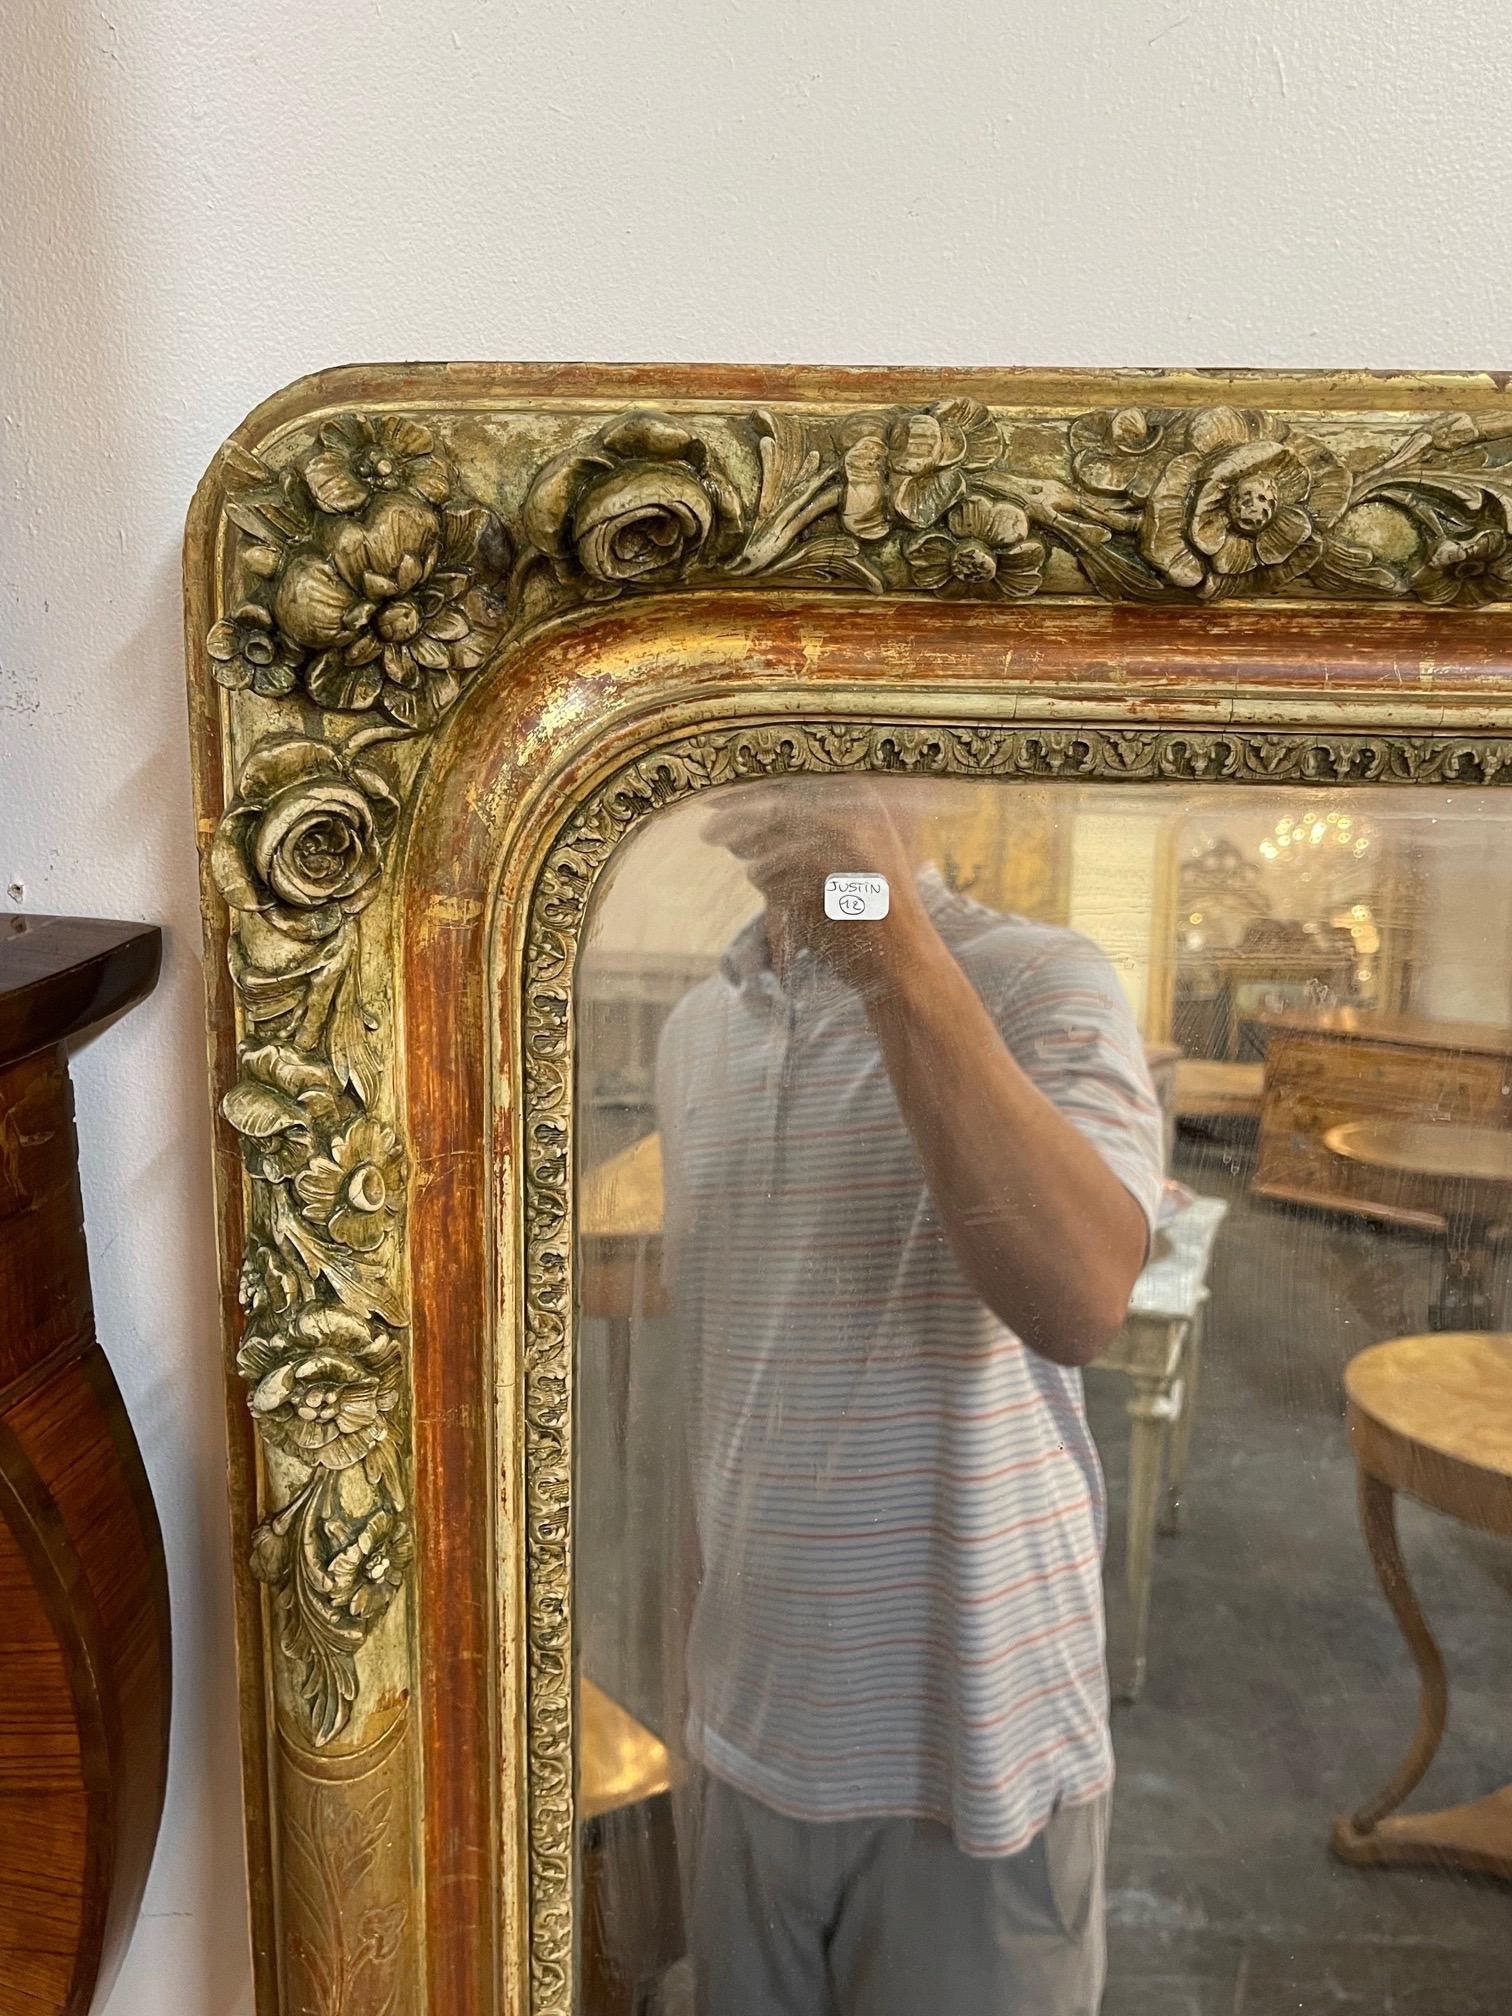 Beautiful large scale 19th century French Louis Philippe giltwood mirror with flowers. Nicely carved and pretty patina as well. The mirror has a slight reddish tint in places. So pretty!!